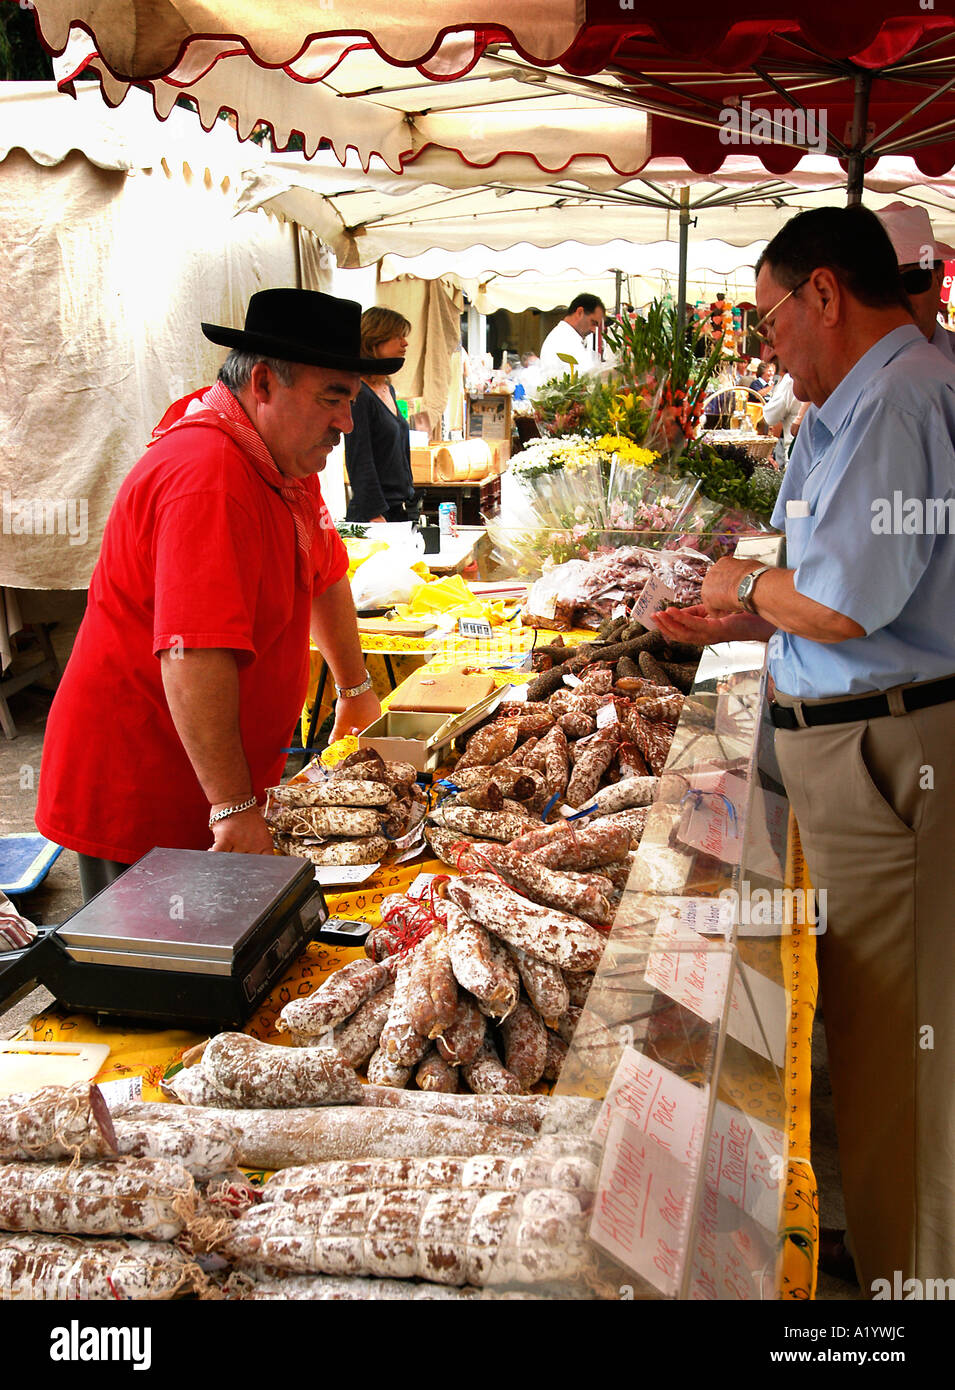 Market trader selling charcuterie, Port Grimaud, Cote d' Azur, France Stock Photo